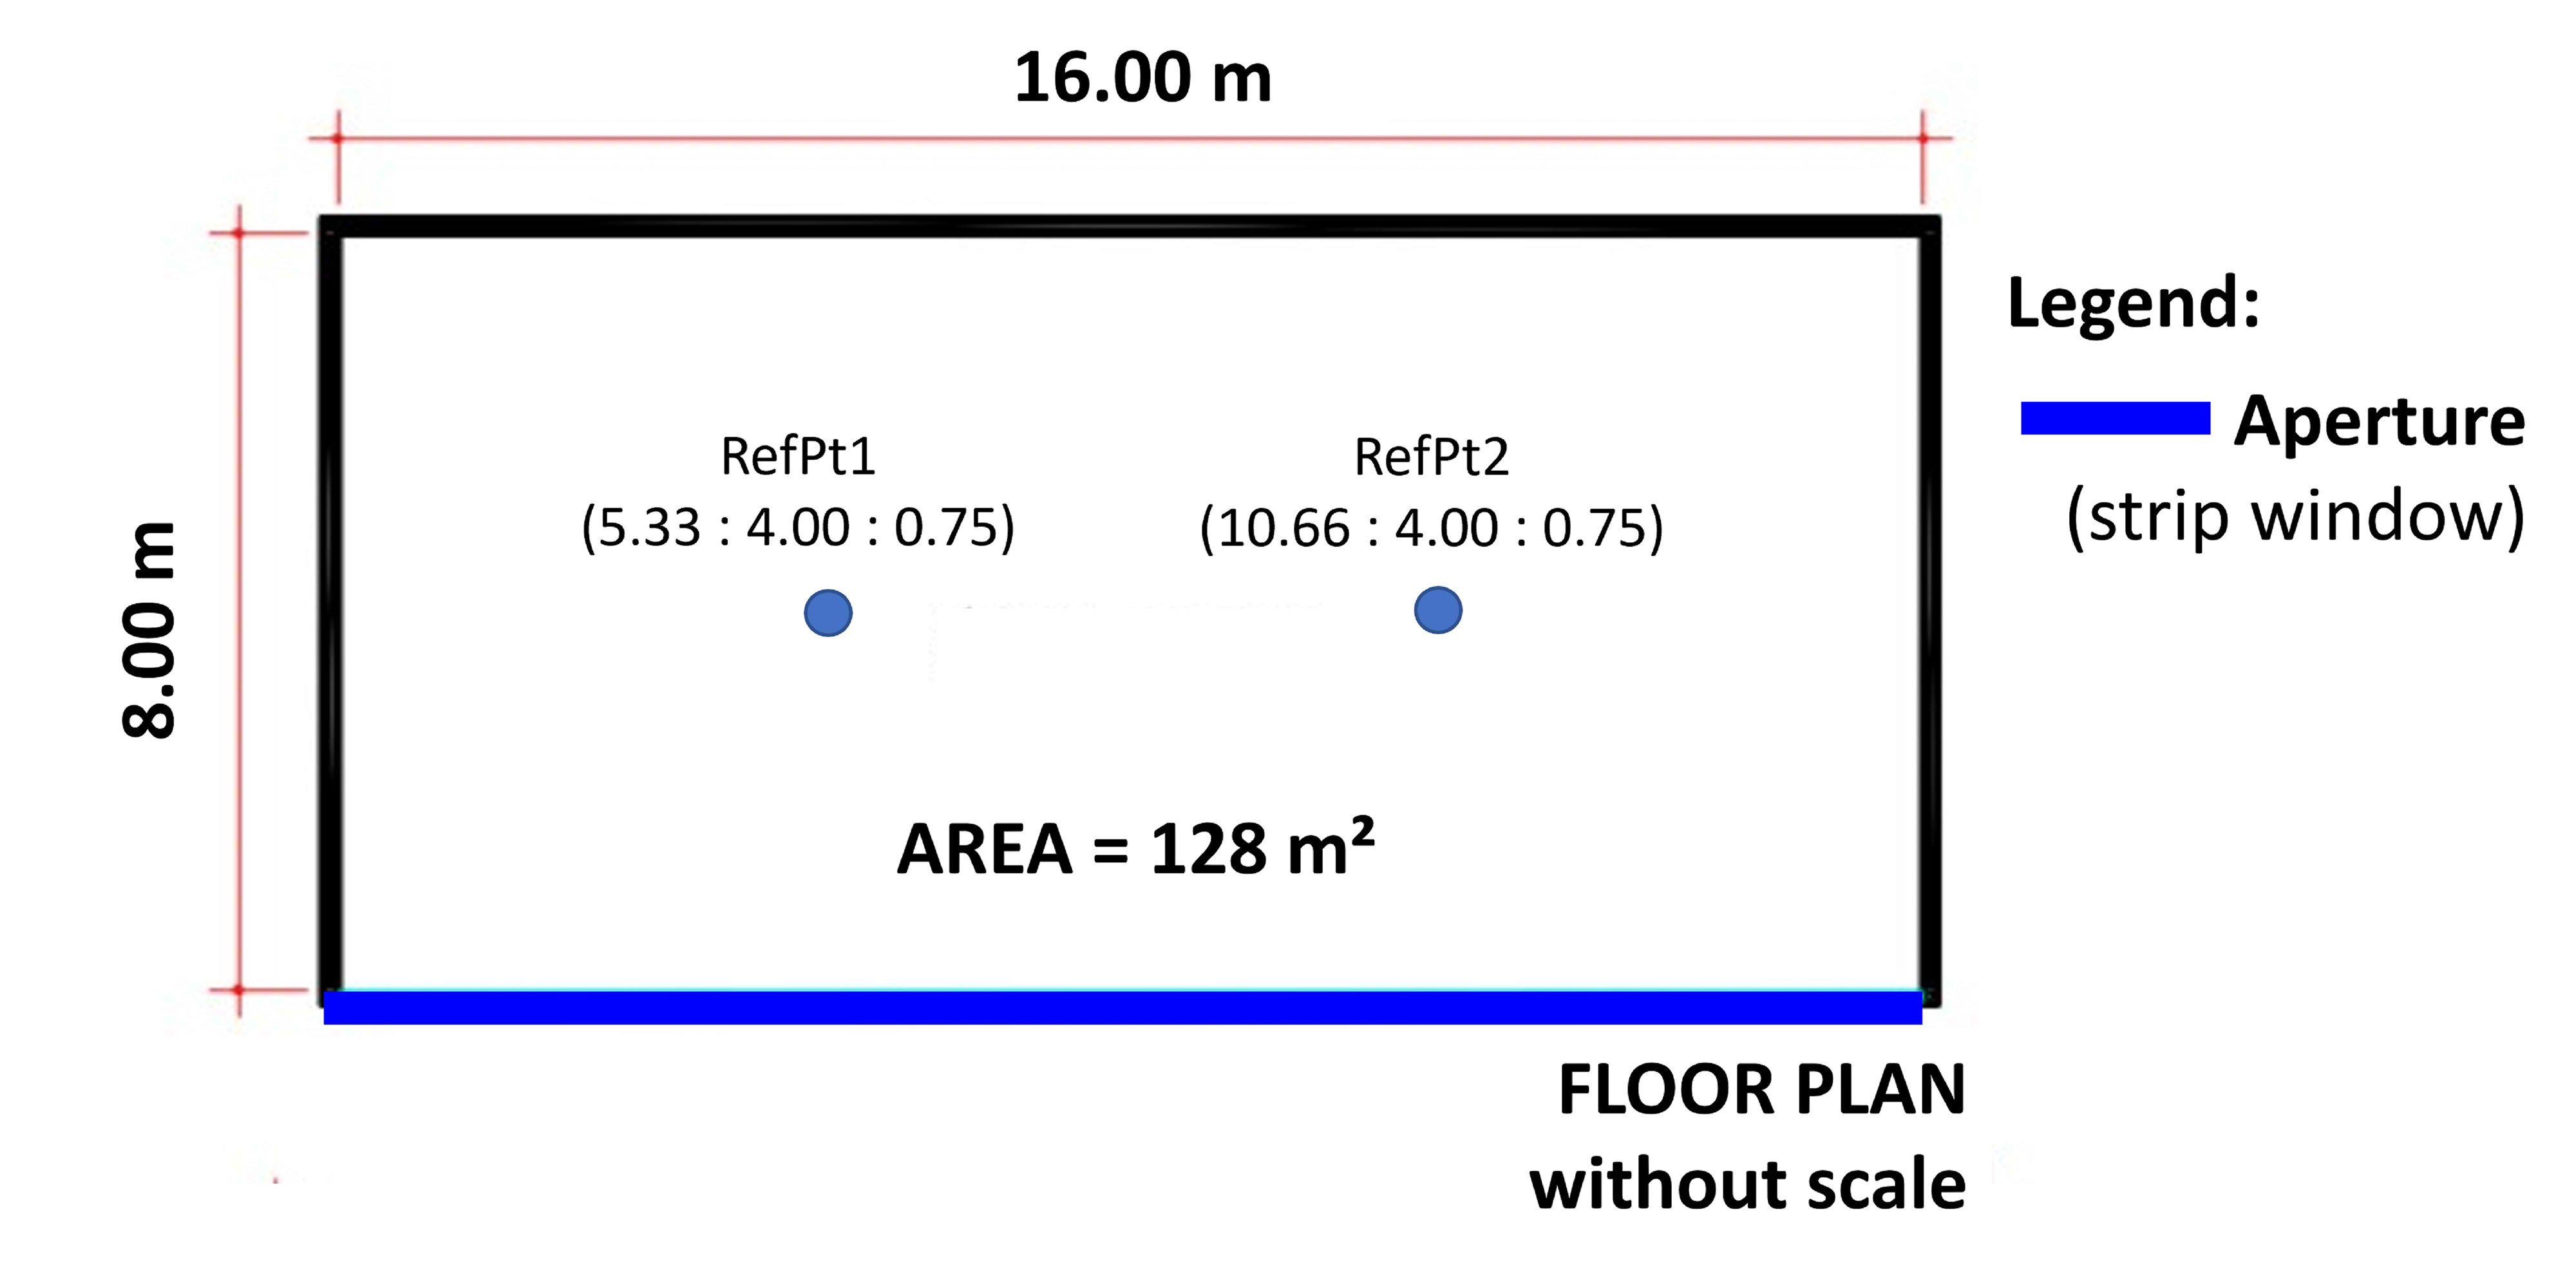 Floor plan of the hypothetical environment associated with the thermal zone.